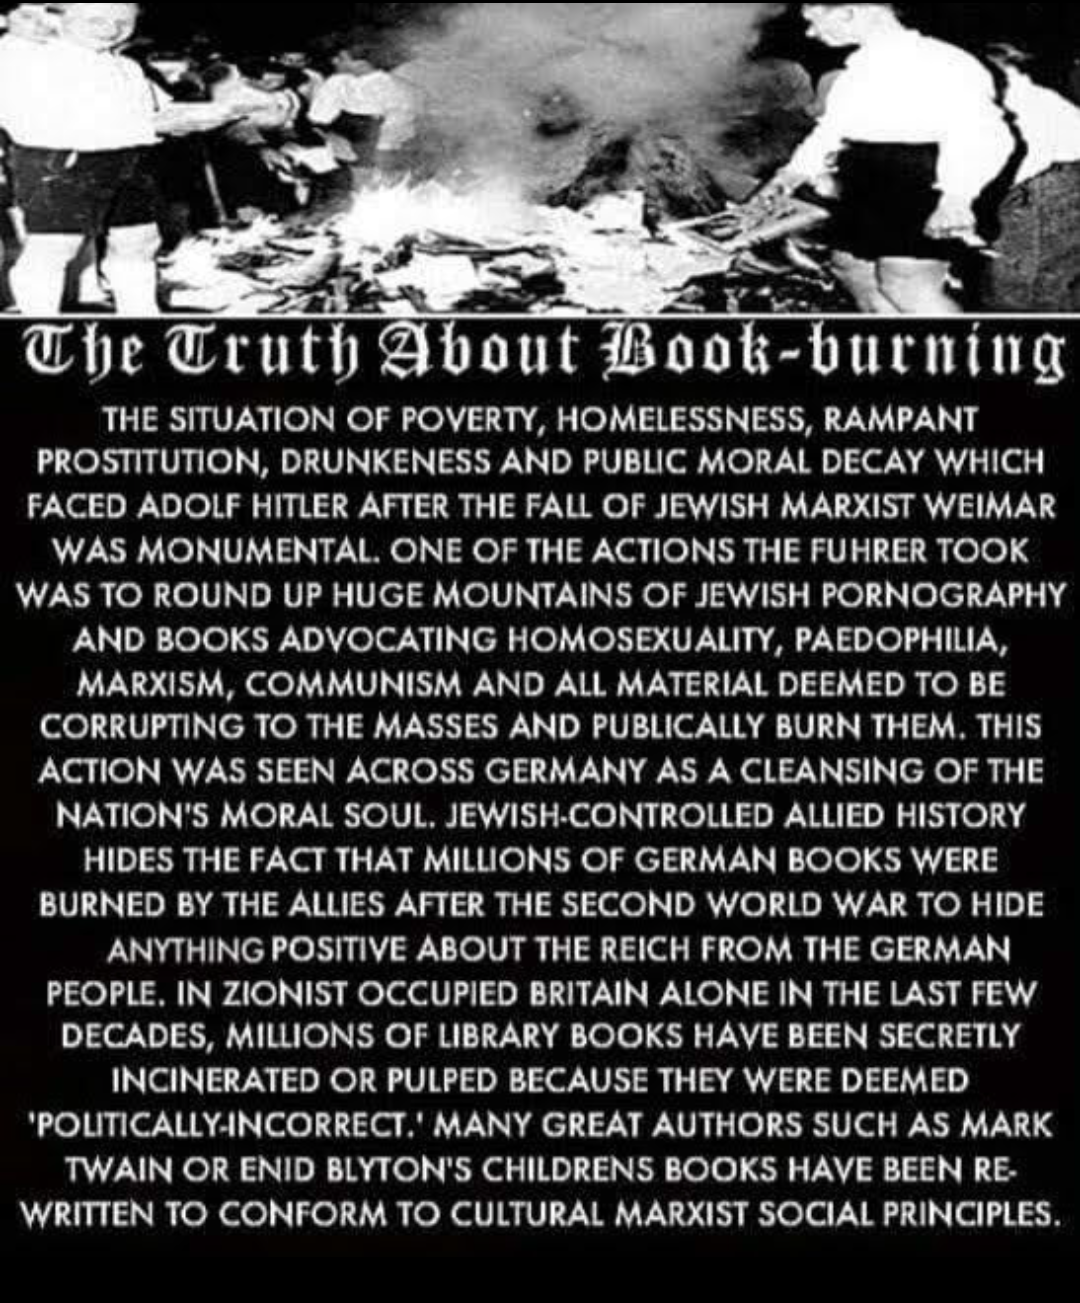 Book Burning is good